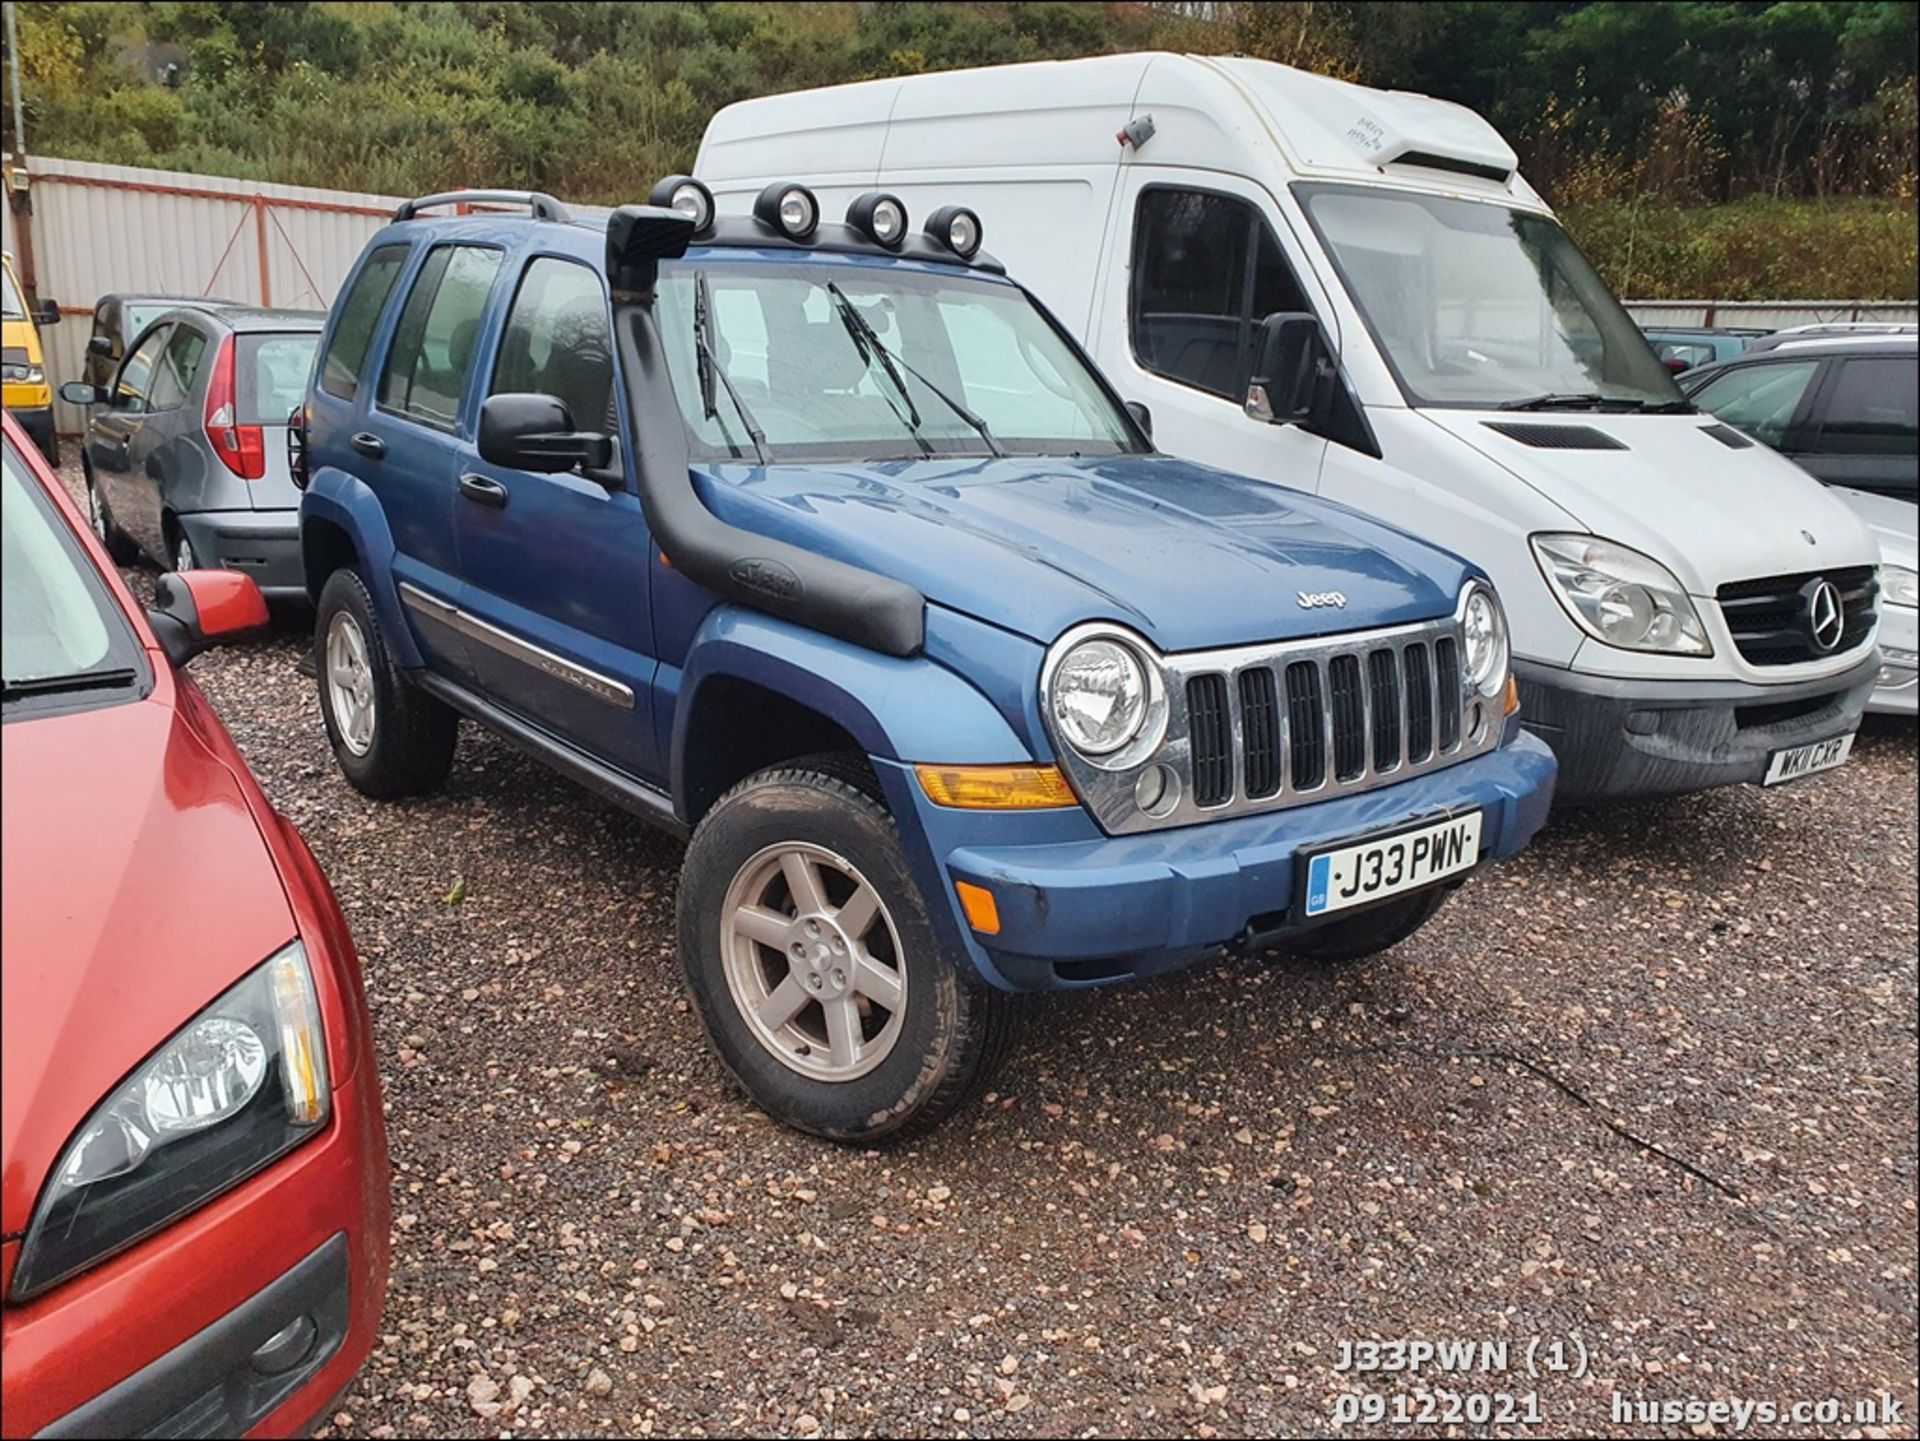 2005 JEEP CHEROKEE LIMITED CRD A - 2766cc 5dr Estate (Blue, 174k) - Image 2 of 28